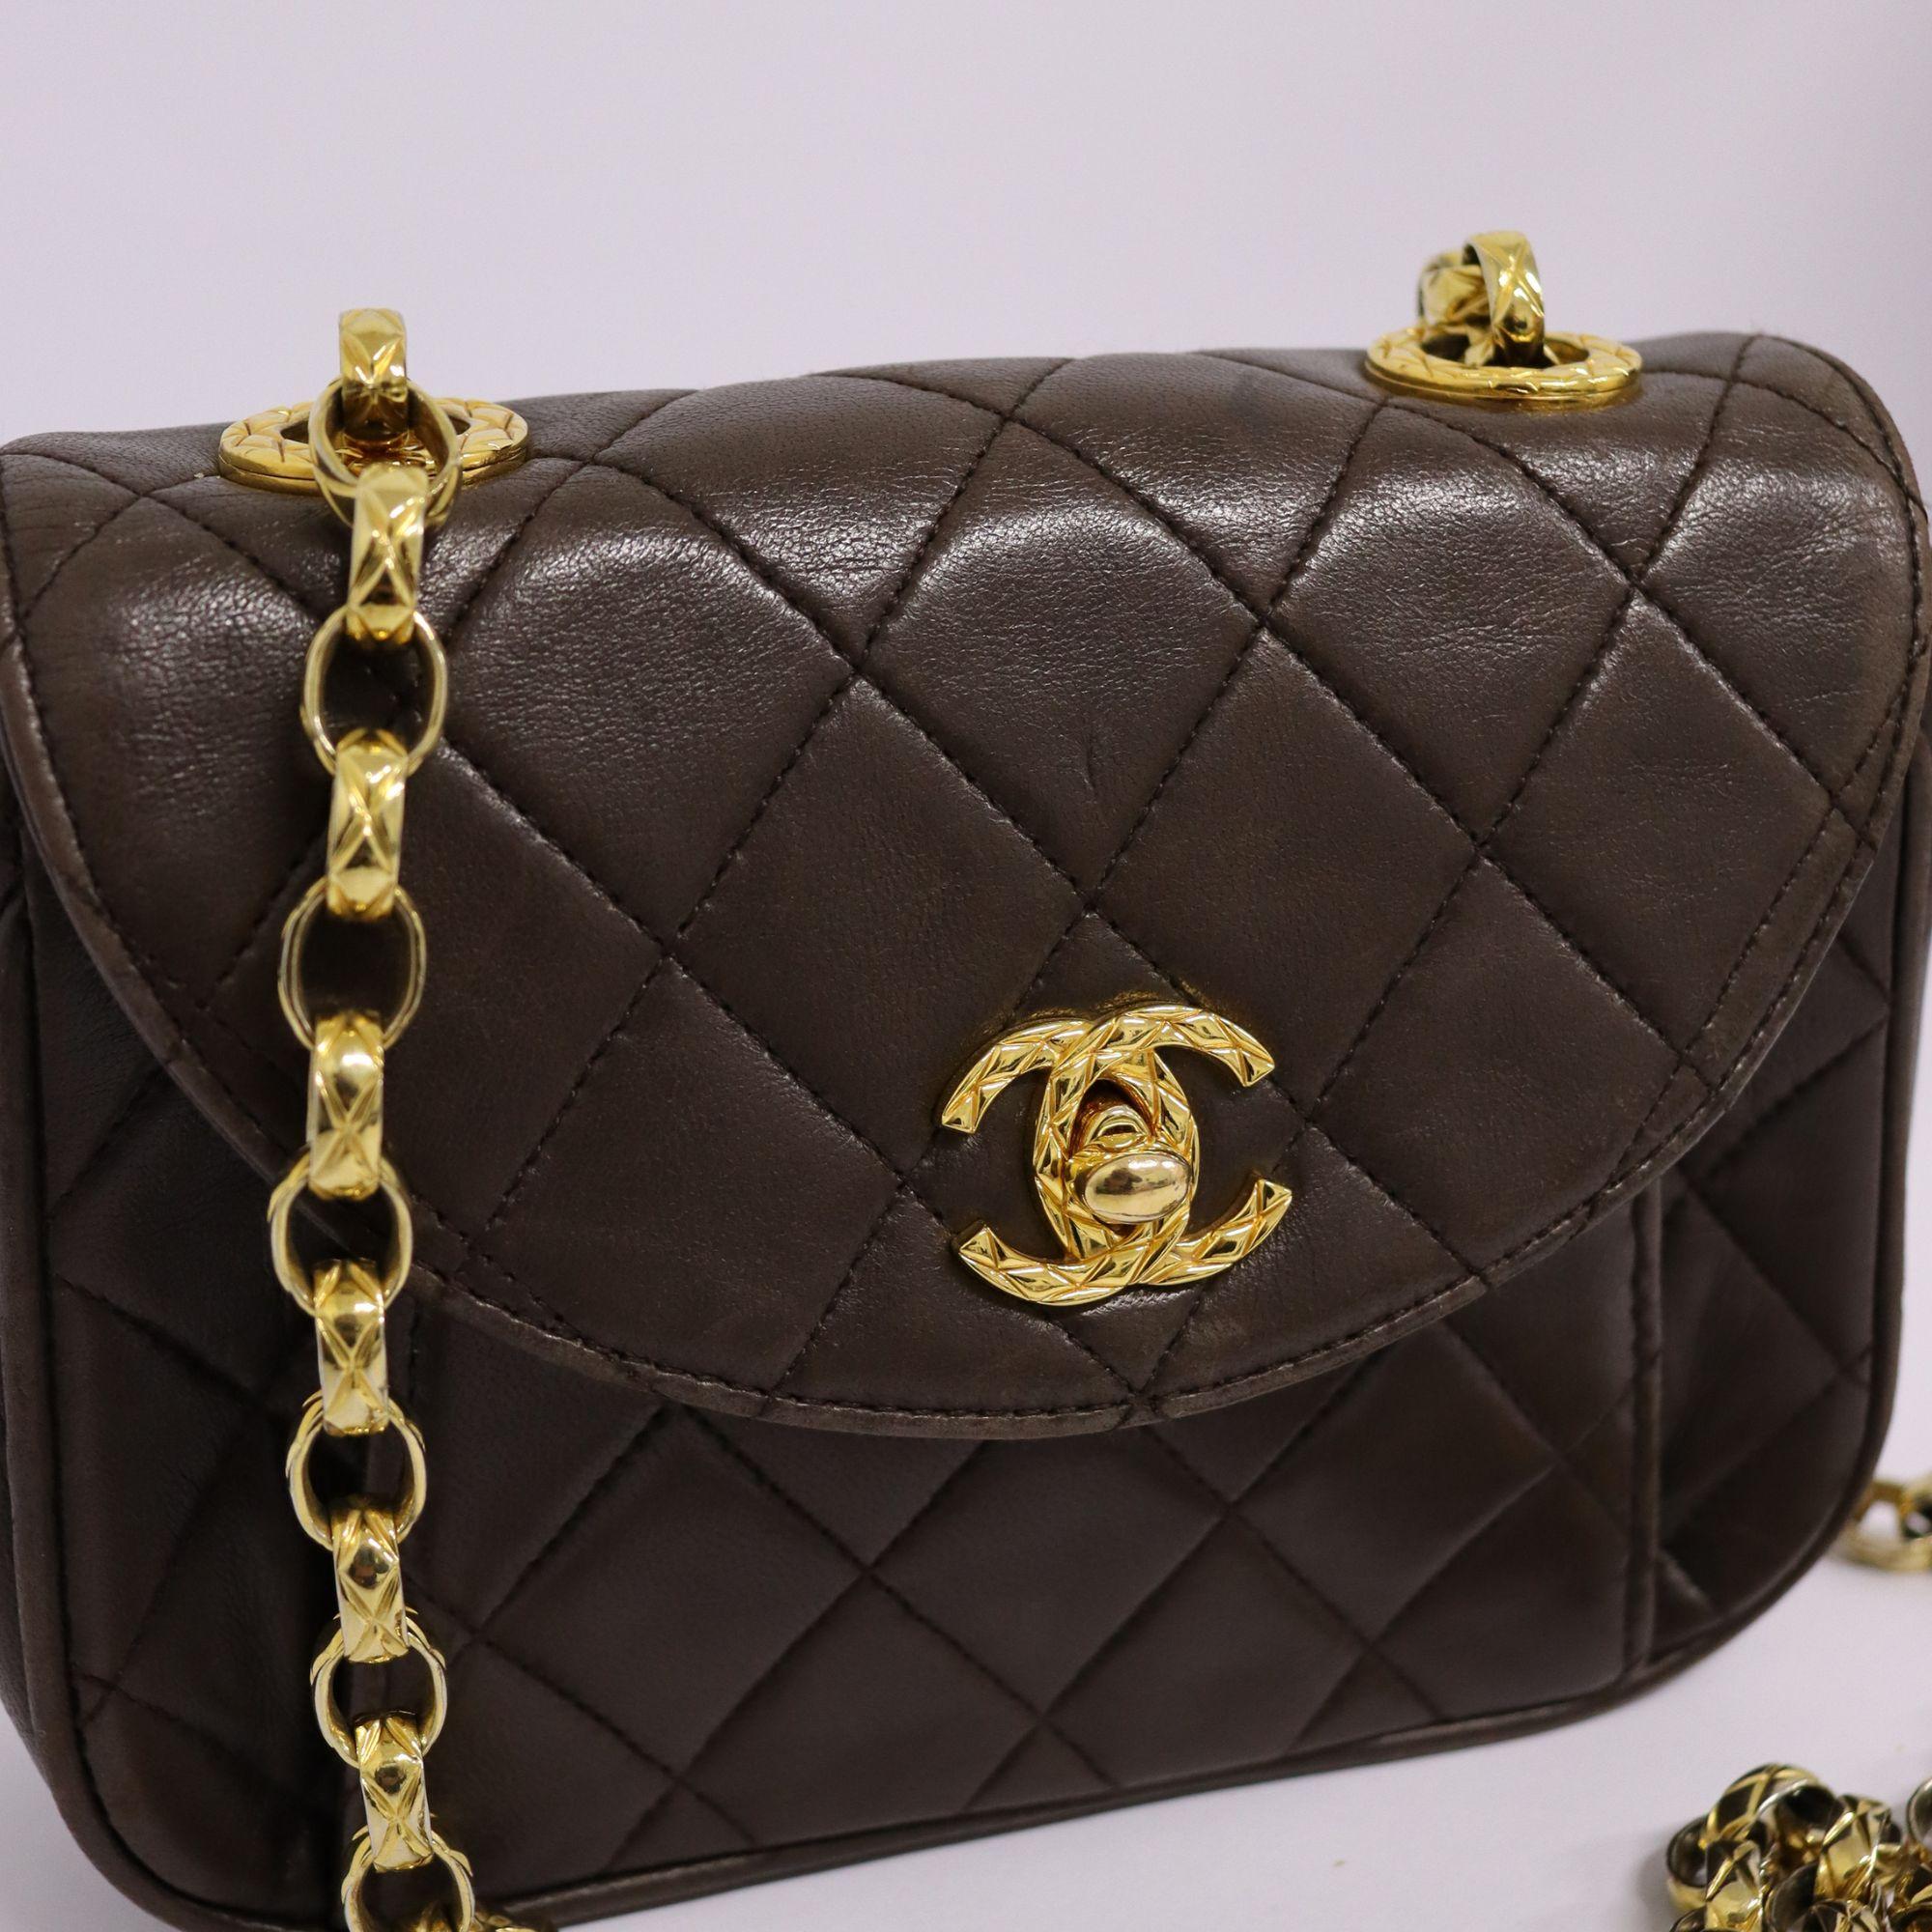 Chanel 90s vintage chocolate brown with classic diamond quilted lambskin. Features chain link shoulder strap and textured CC turn lock. Great condition with minor discoloration on edges. Interior features the same color with a front pocket and one